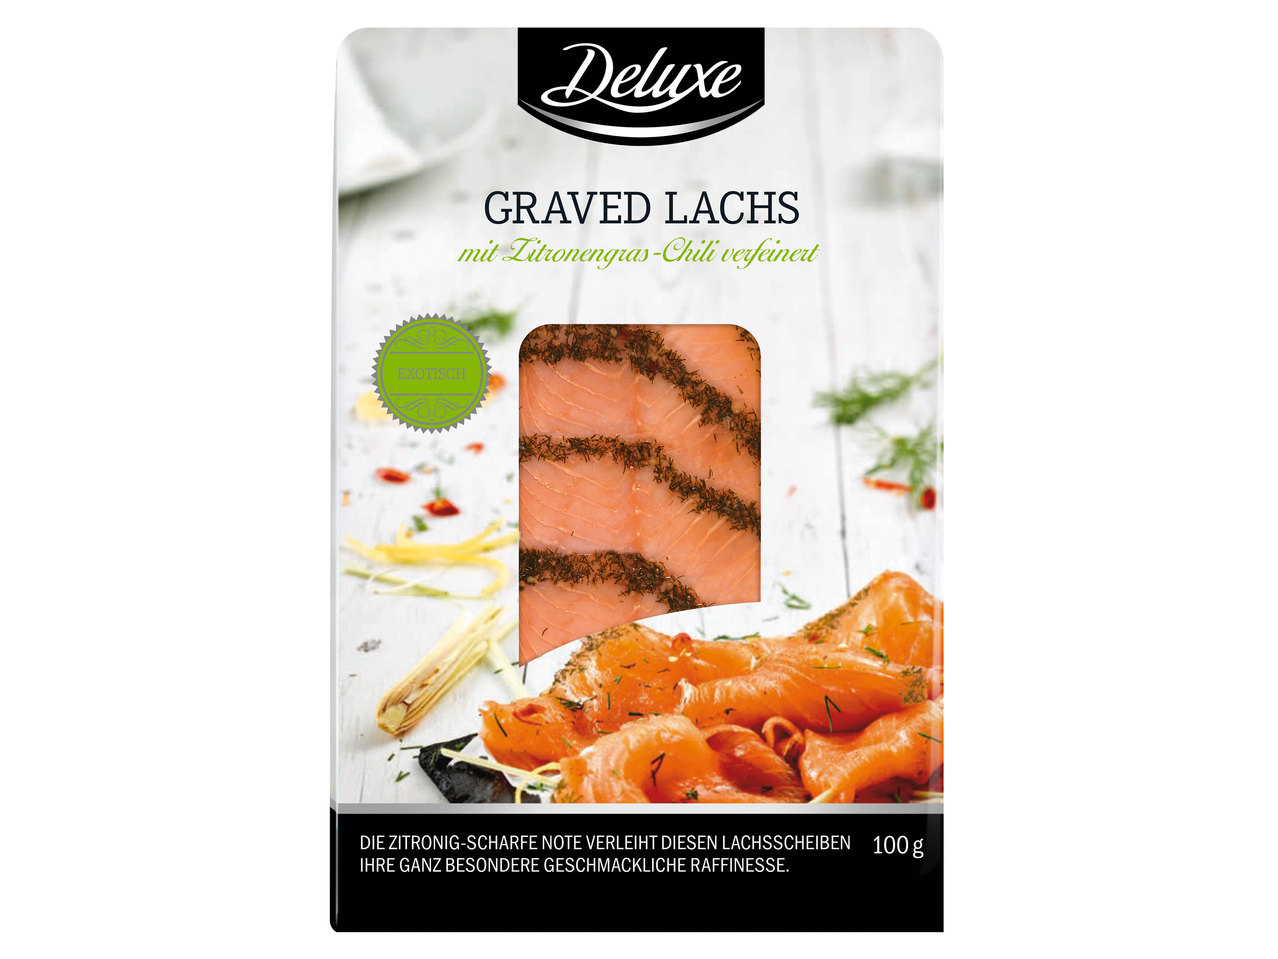 DELUXE Graved Lachs